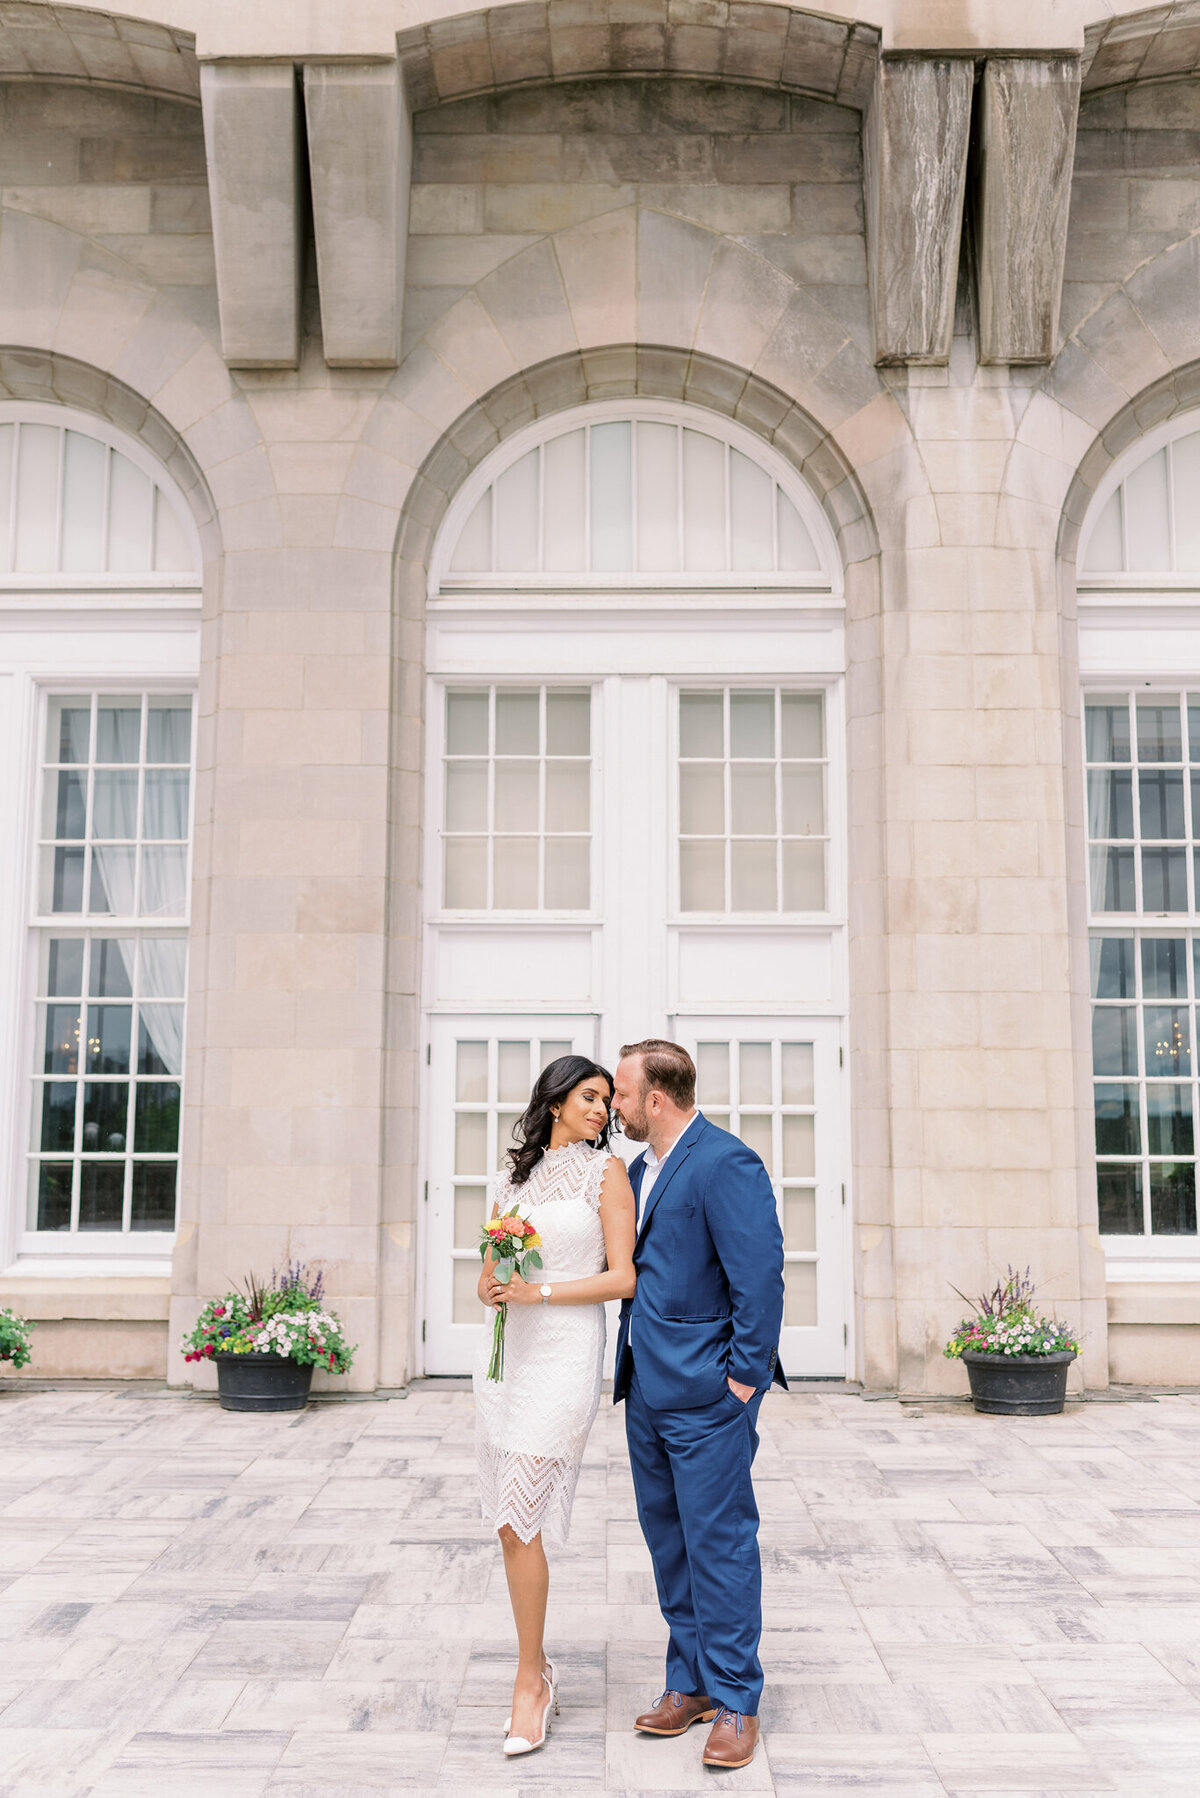 Elopement wedding inspiration, gorgeous trendy couple standing in front of Fairmont Hotel Macdonald, bride wearing a stunning lace knee-length wedding dress.